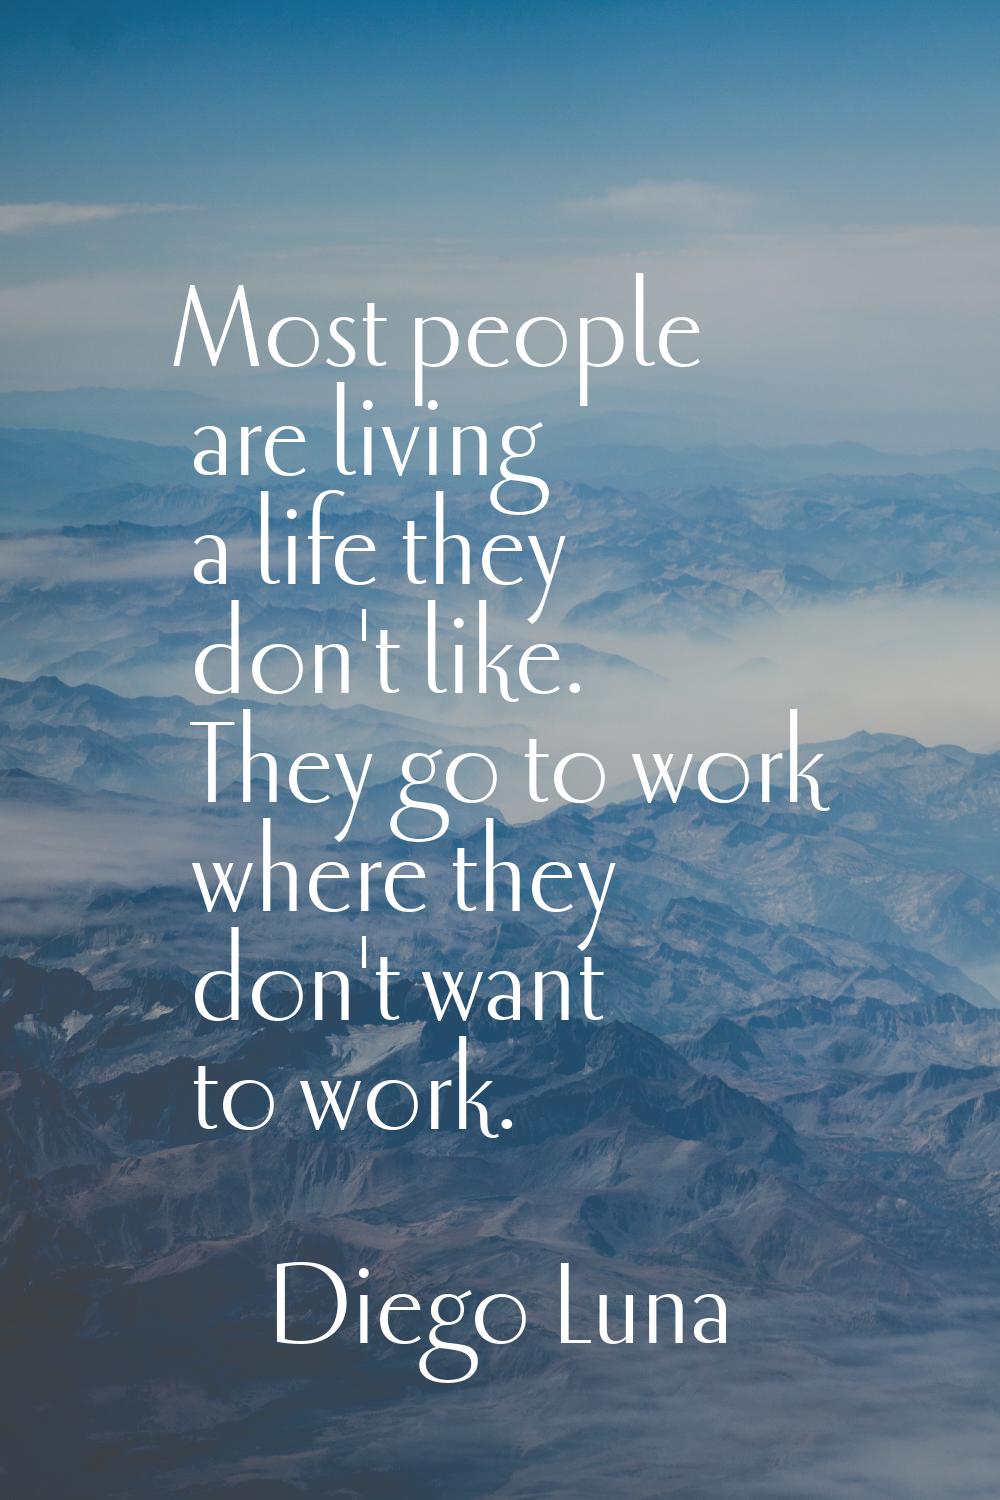 Most people are living a life they don't like. They go to work where they don't want to work.